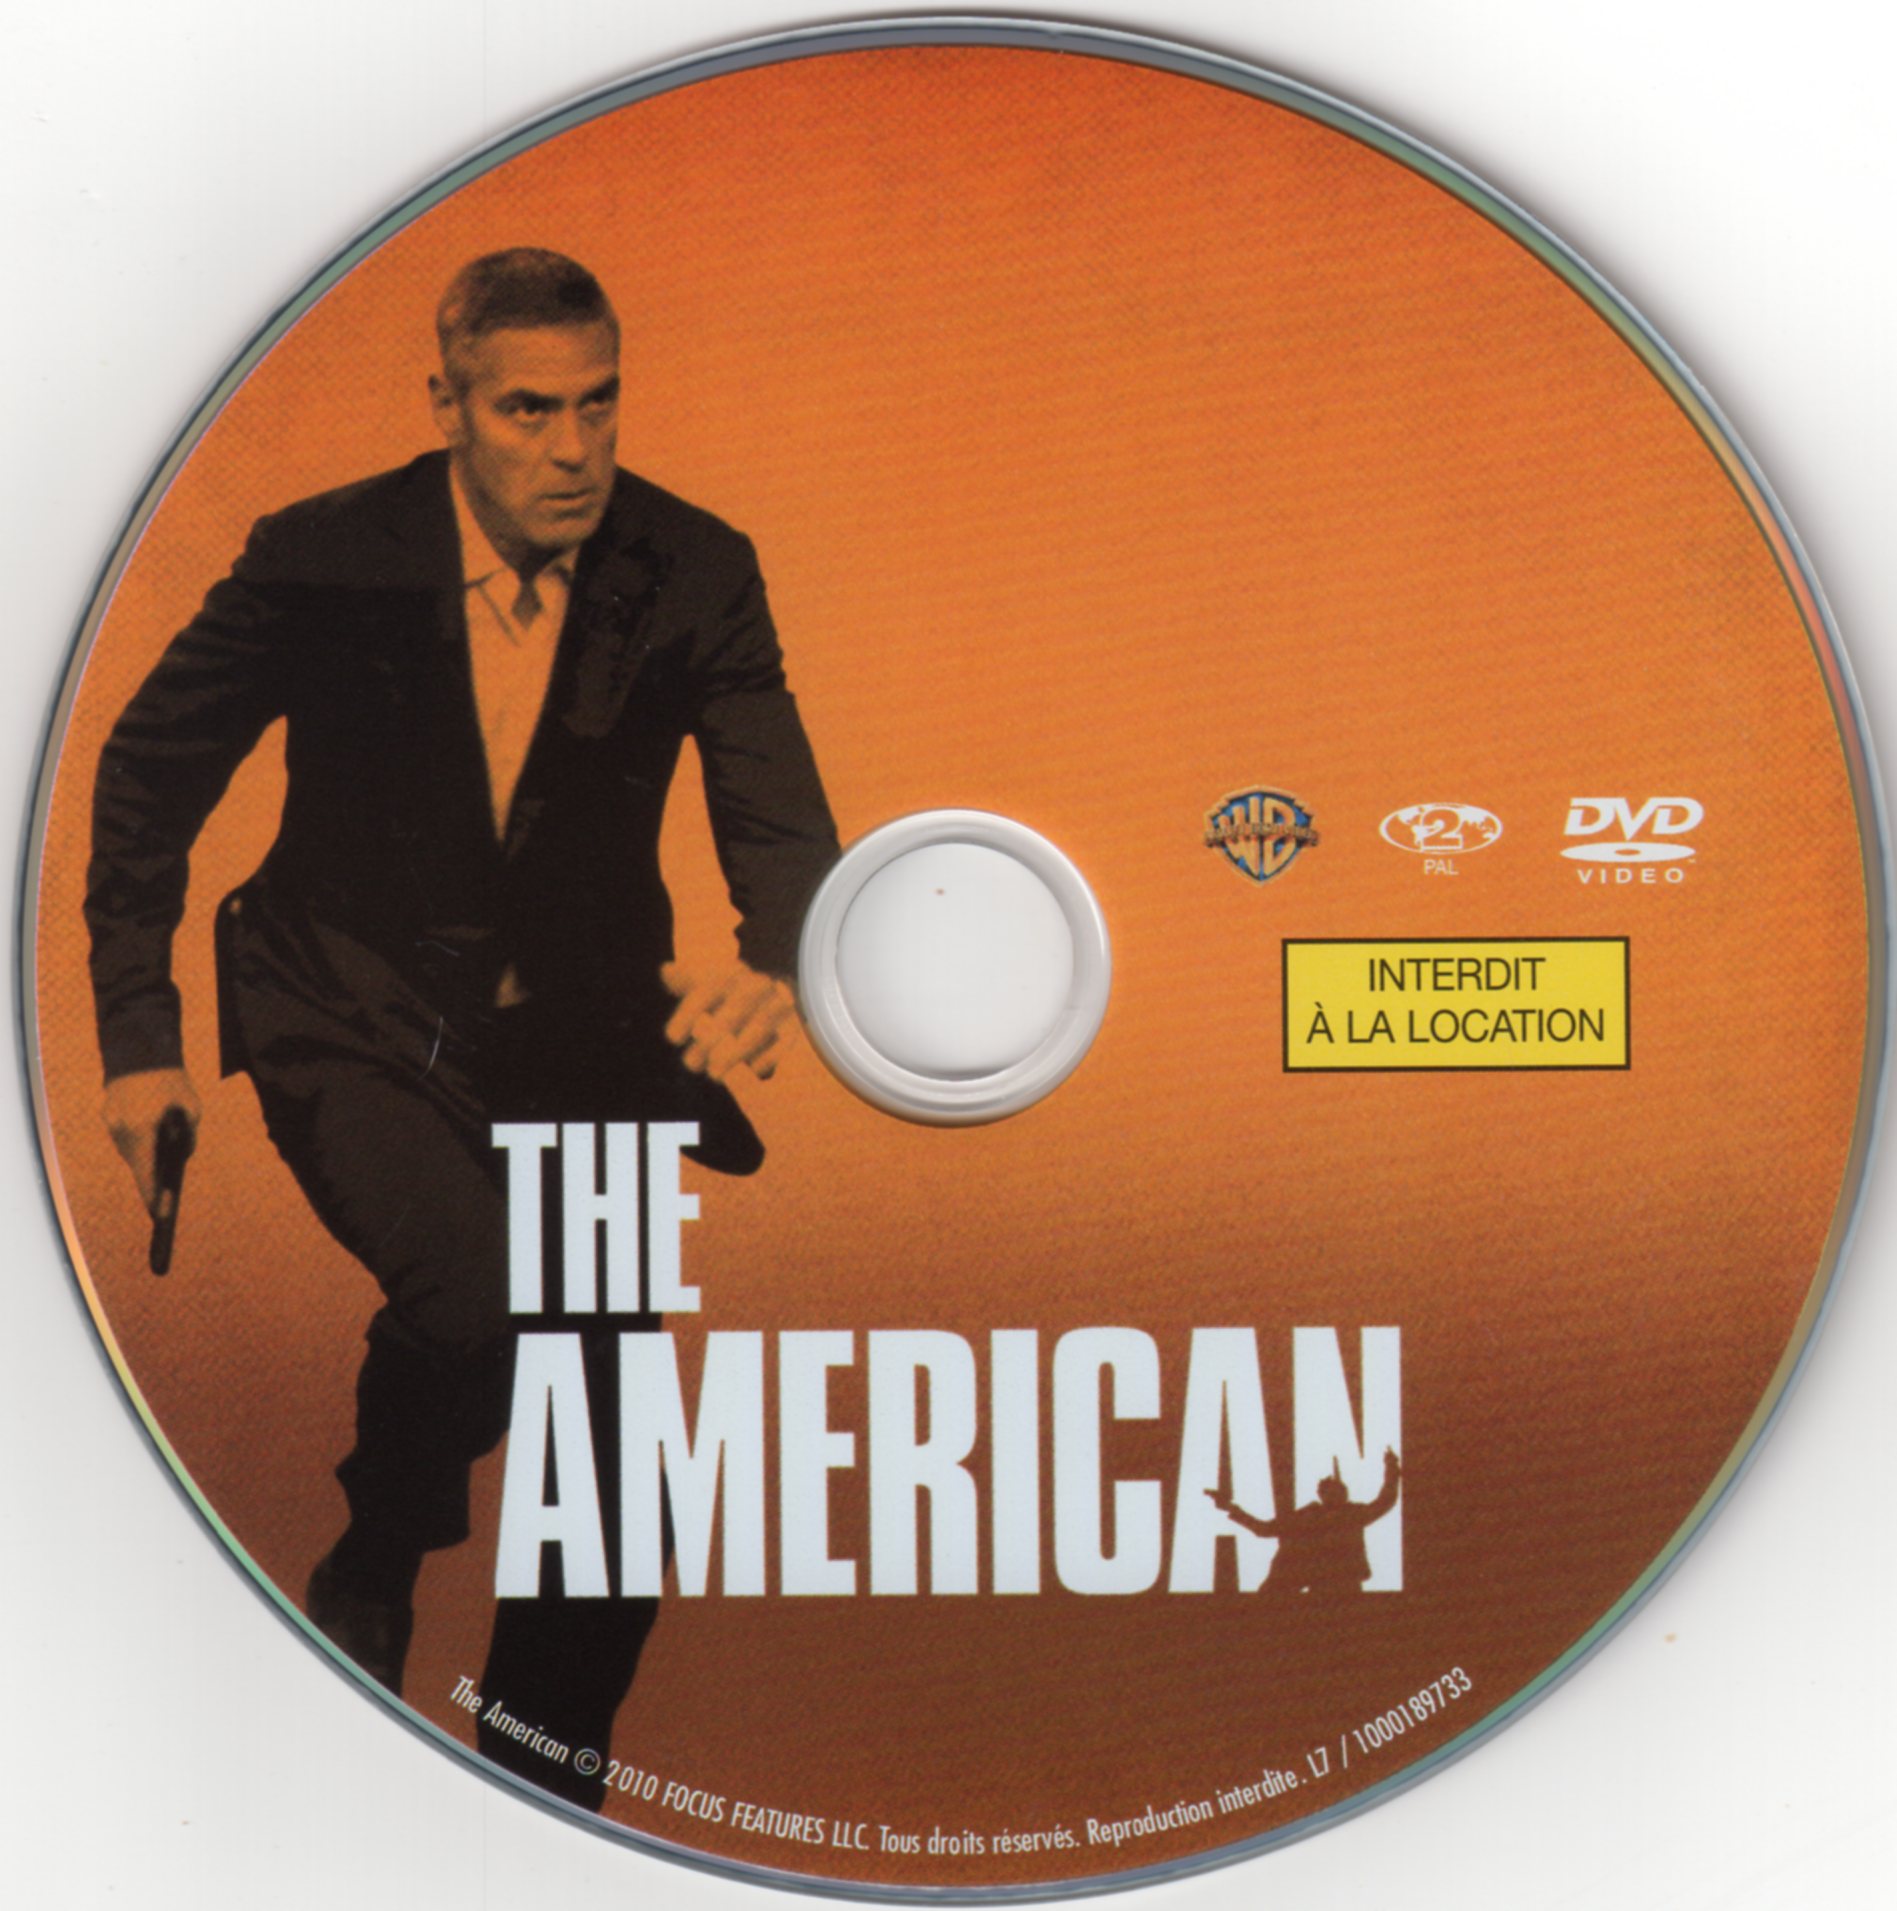 The american